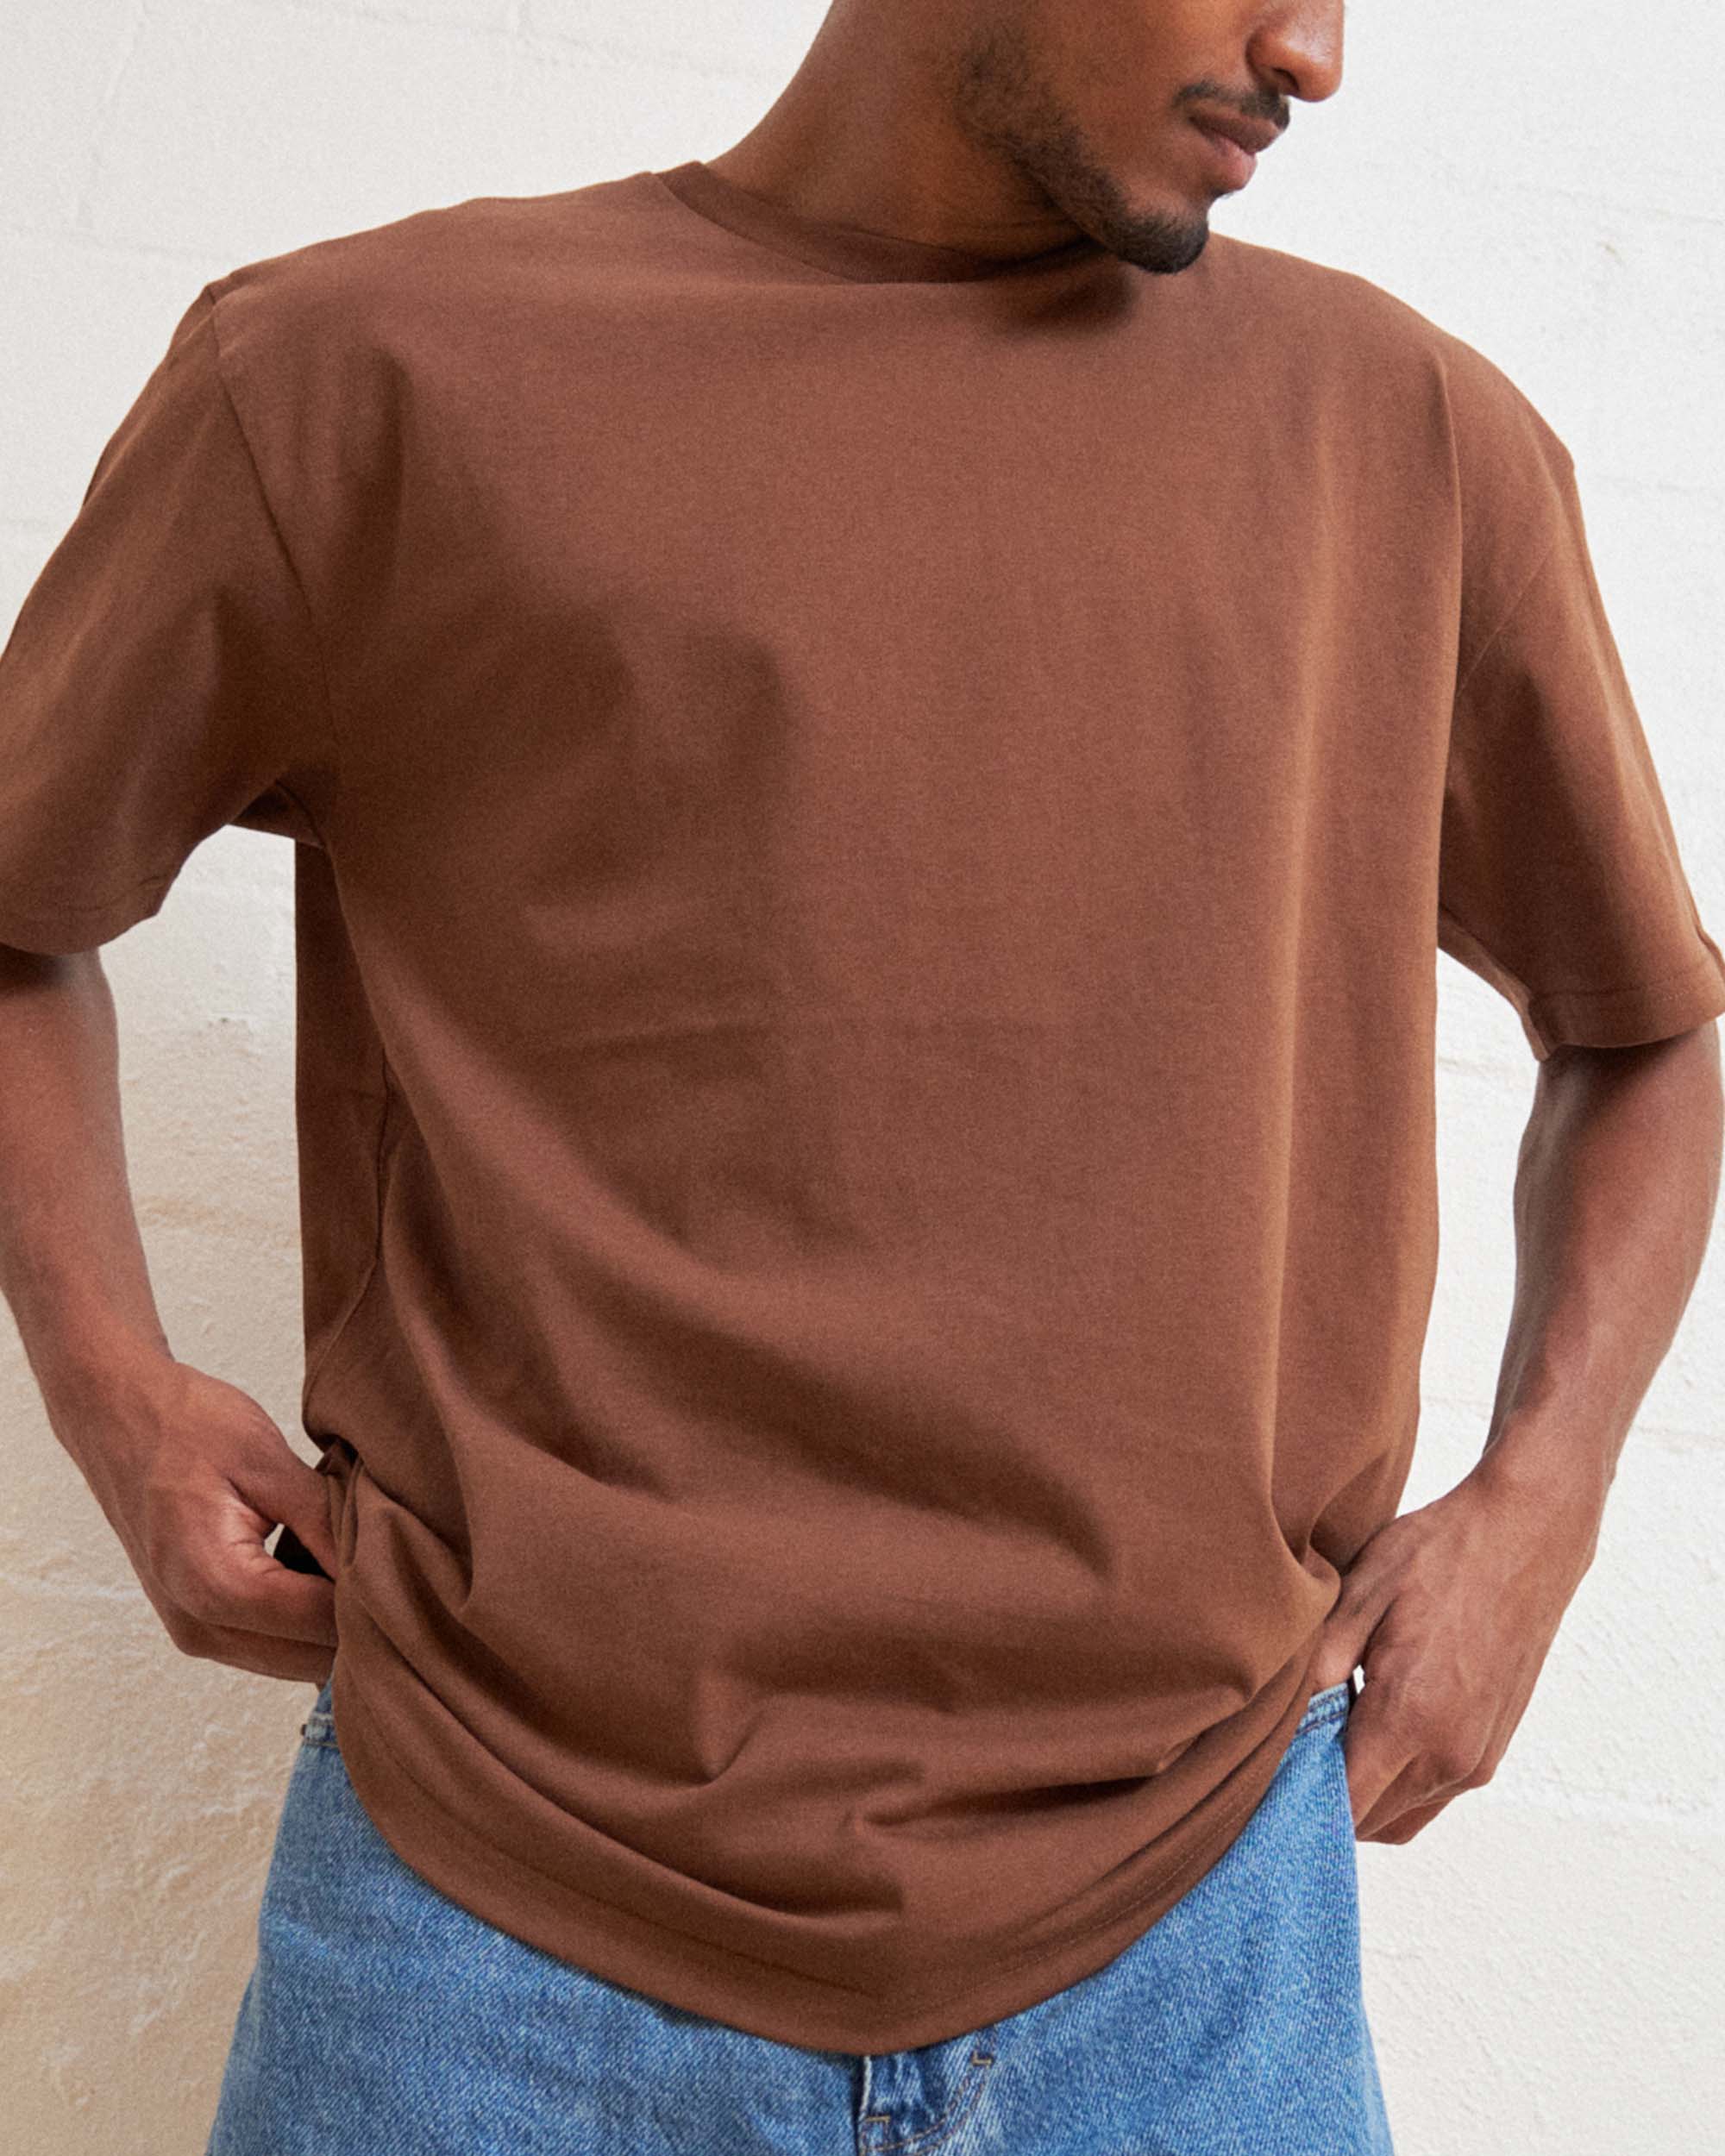 Classic Tee 5-Pack: Grey, Charcoal, Brown, Natural, White